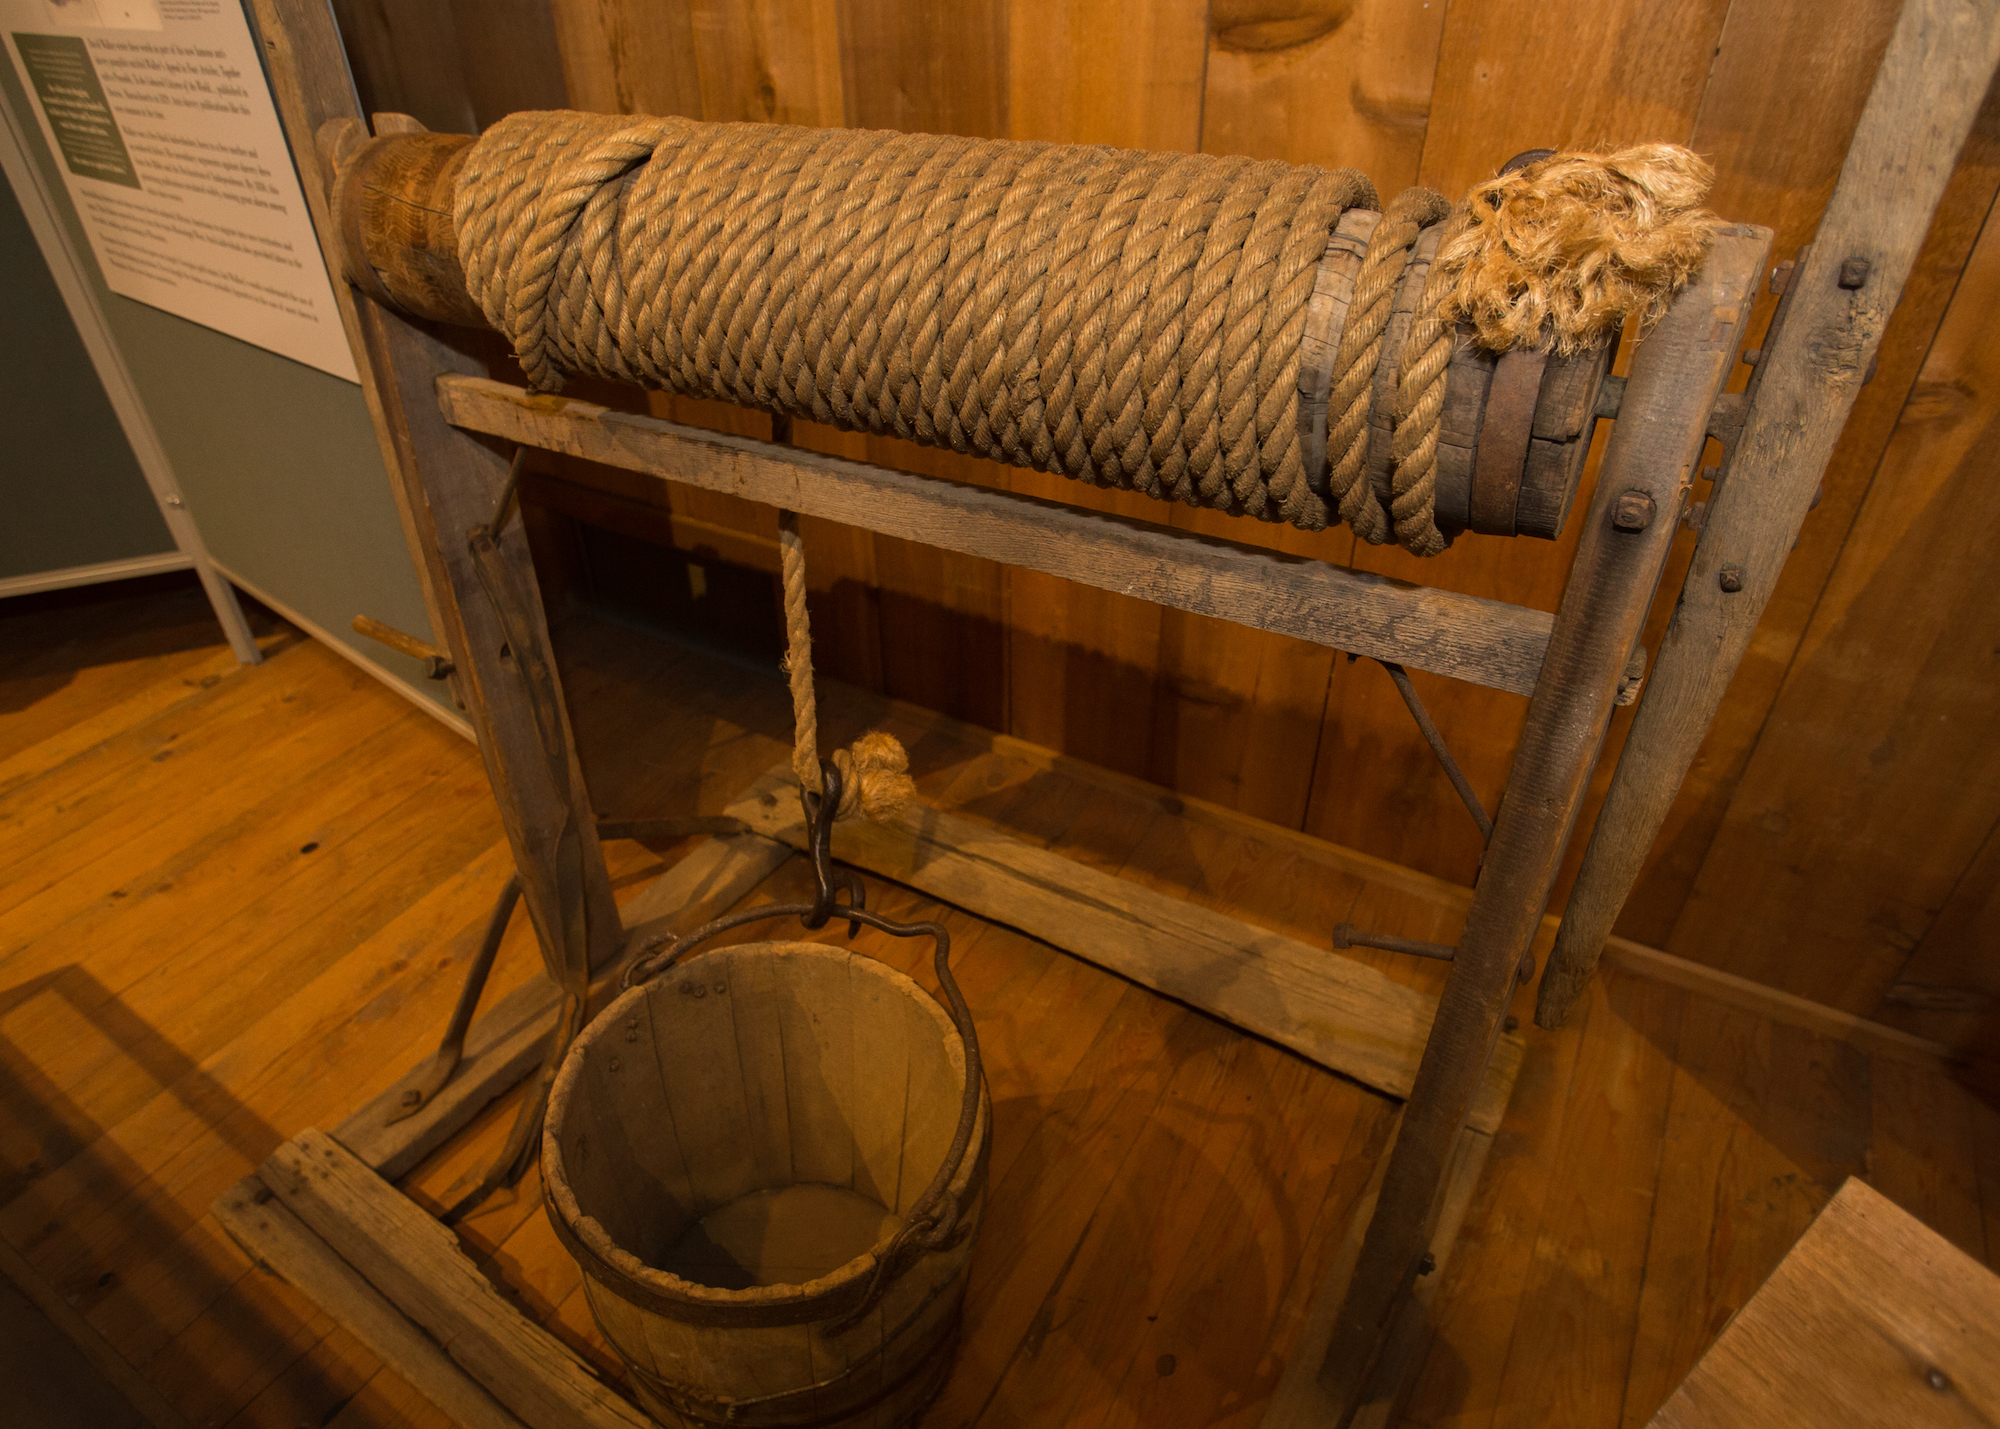 A color photograph of a windlass with a rope wound around its beam and a wooden bucket attached to the line below.